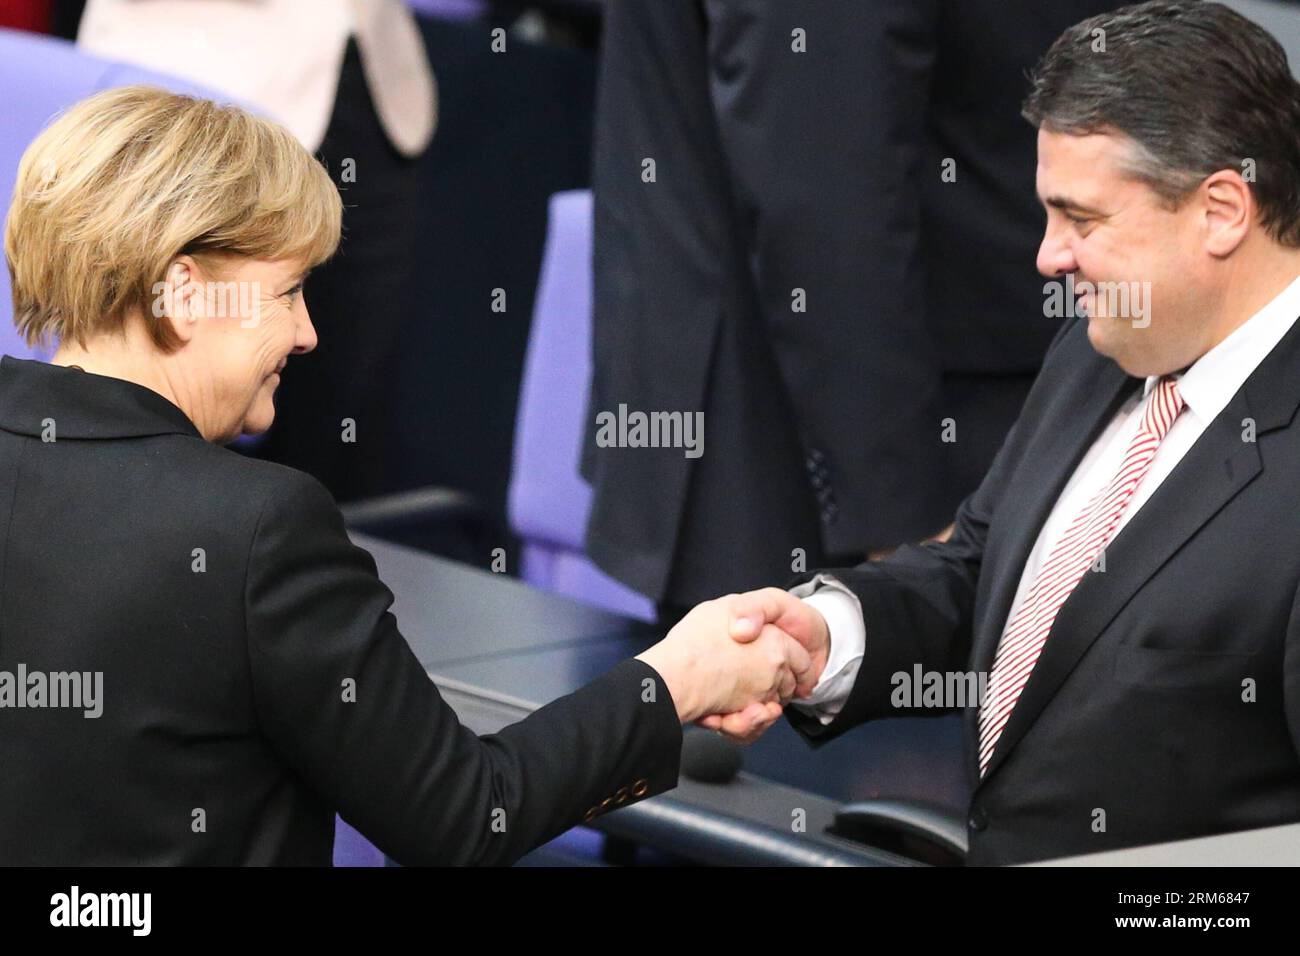 131217 -- BERLIN, Dec. 17, 2013 Xinhua -- German Chancellor Angela Merkel L shakes hands with German Vice-Chancellor and Minister of Economics and Energy Sigmar Gabriel during the meeting of Bundestag, Germany s lower house of parliament, in Berlin, Germany on Dec. 17, 2013. German new government headed by Chancellor Angela Merkel was sworn into office on Tuesday to rule Europe s biggest economy for the next four years. Cabinet ministers of the new coalition government, are formed by Merkel s Christian Democratic Union CDU, its Bavarian sister party Chrisitian Social Union CSU, and the Social Stock Photo